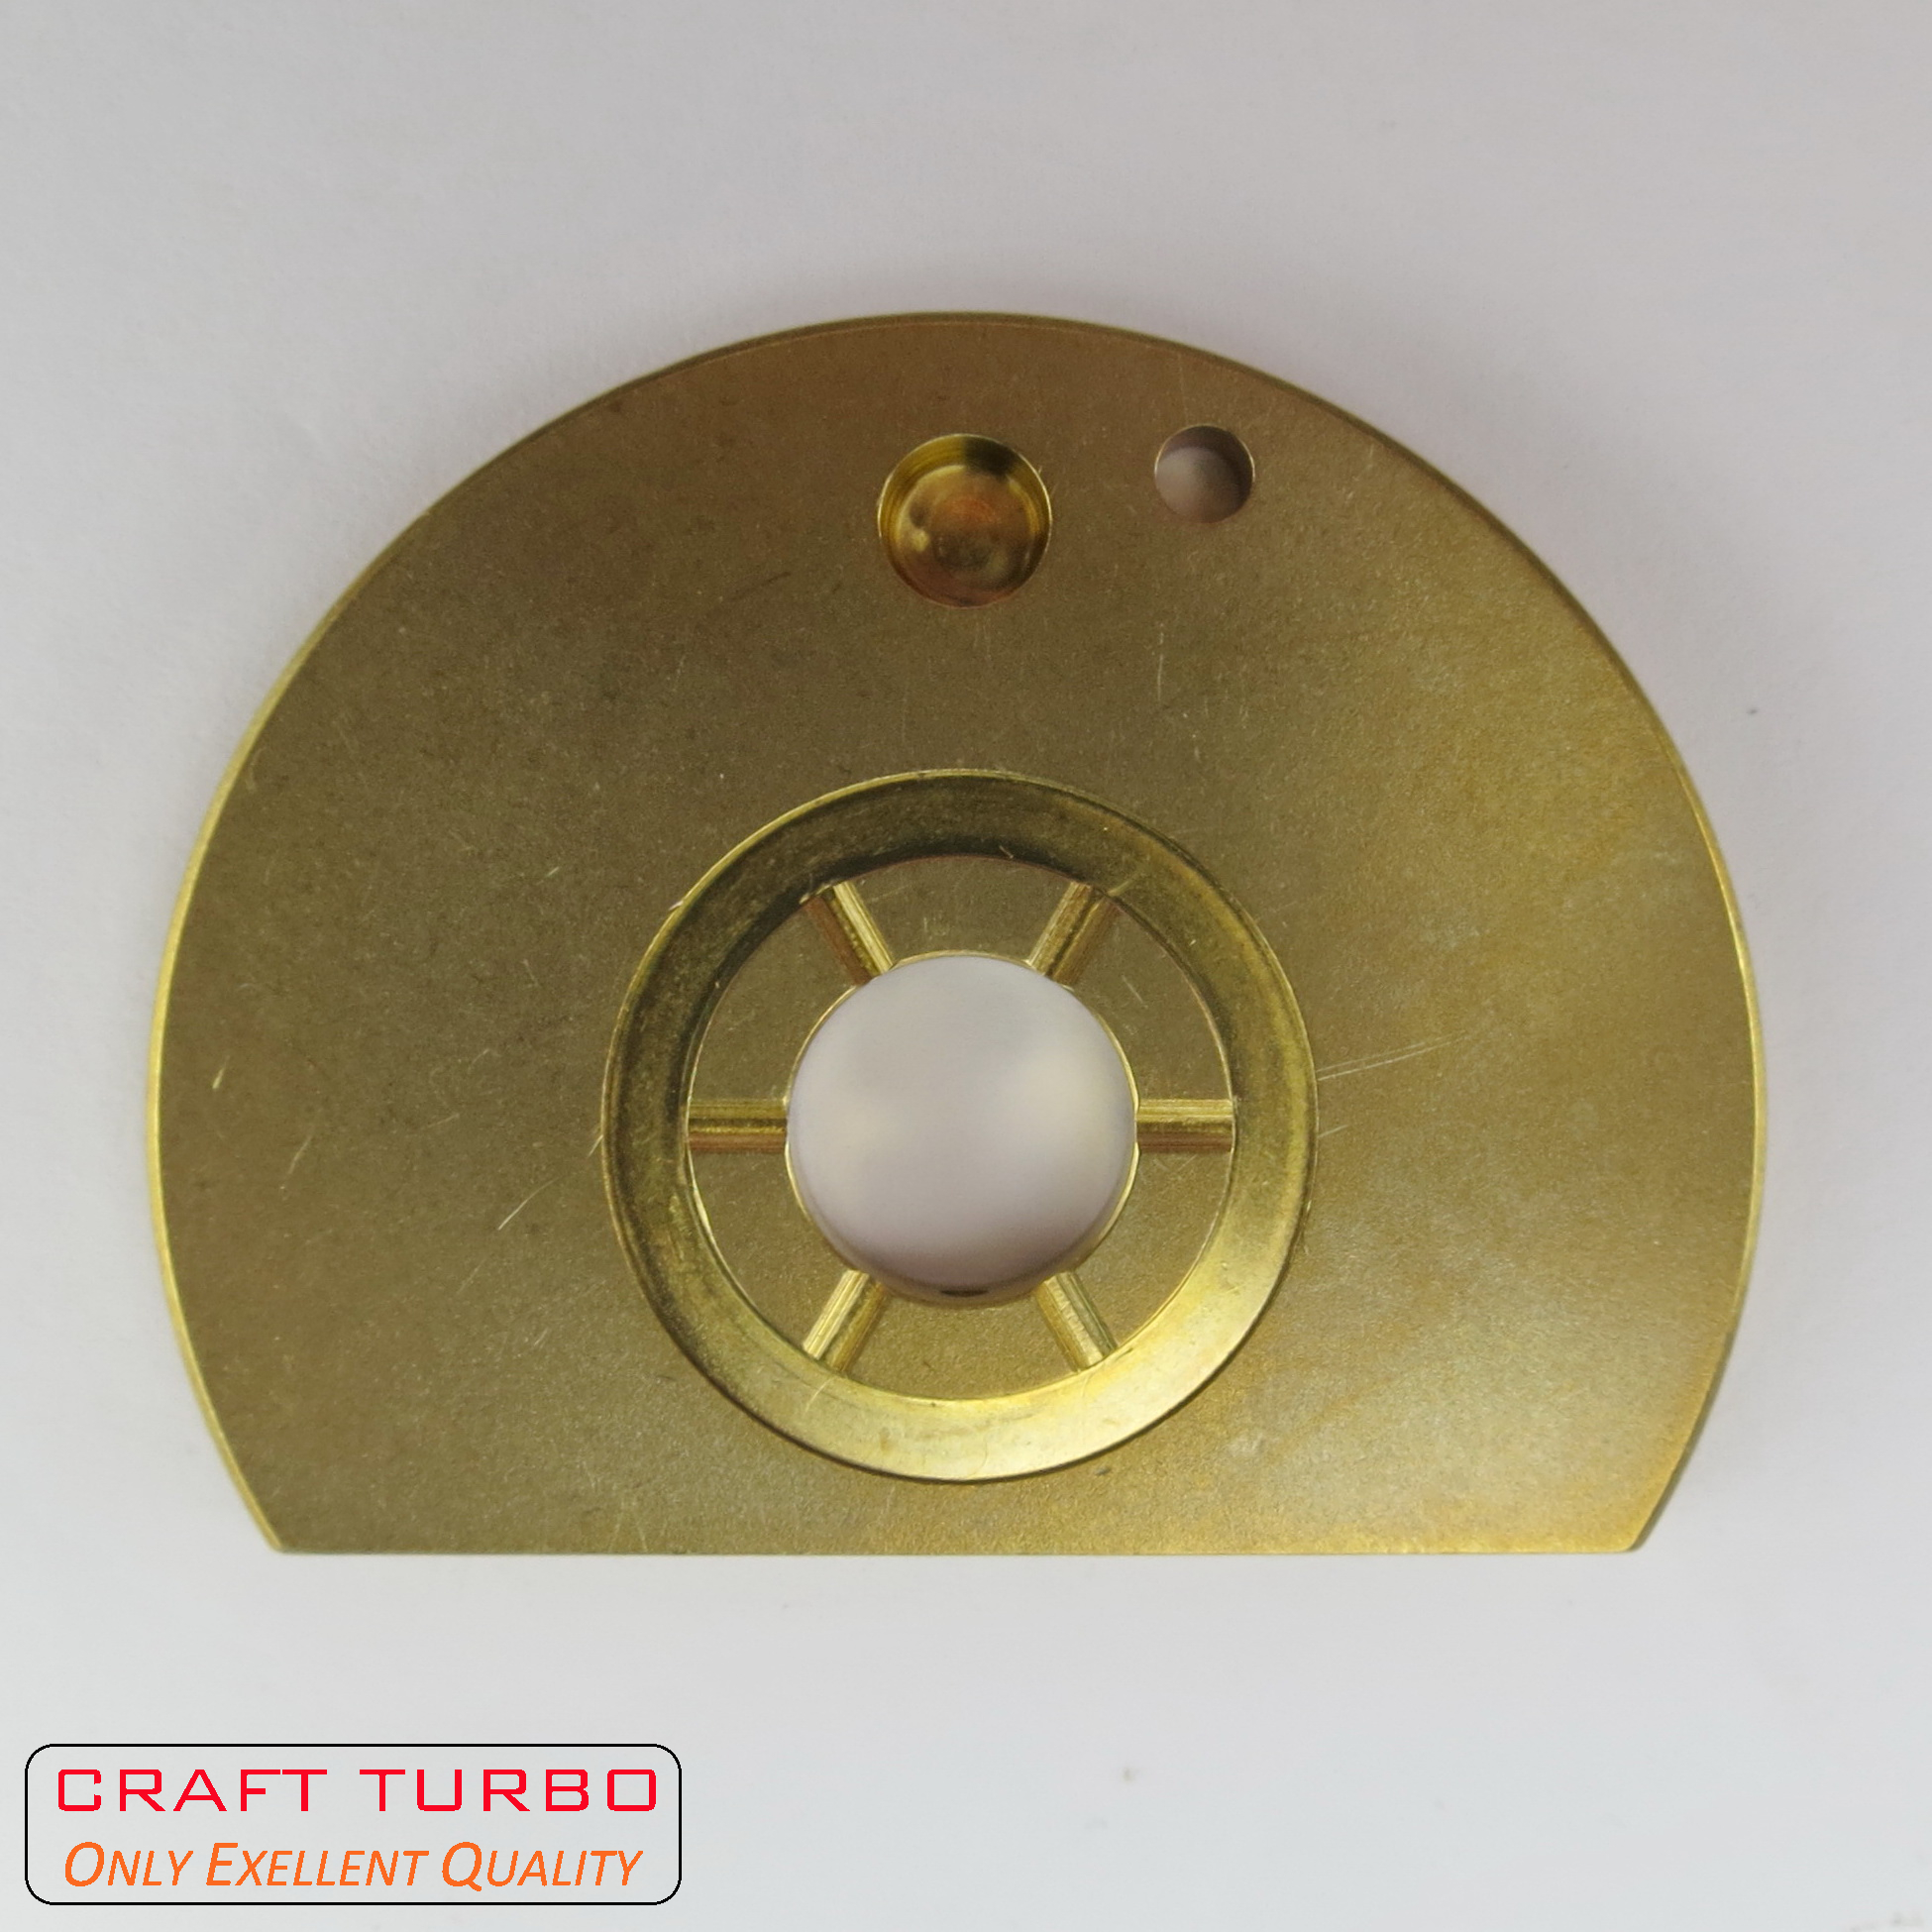  S2A Thrust Bearing for Turbocharger